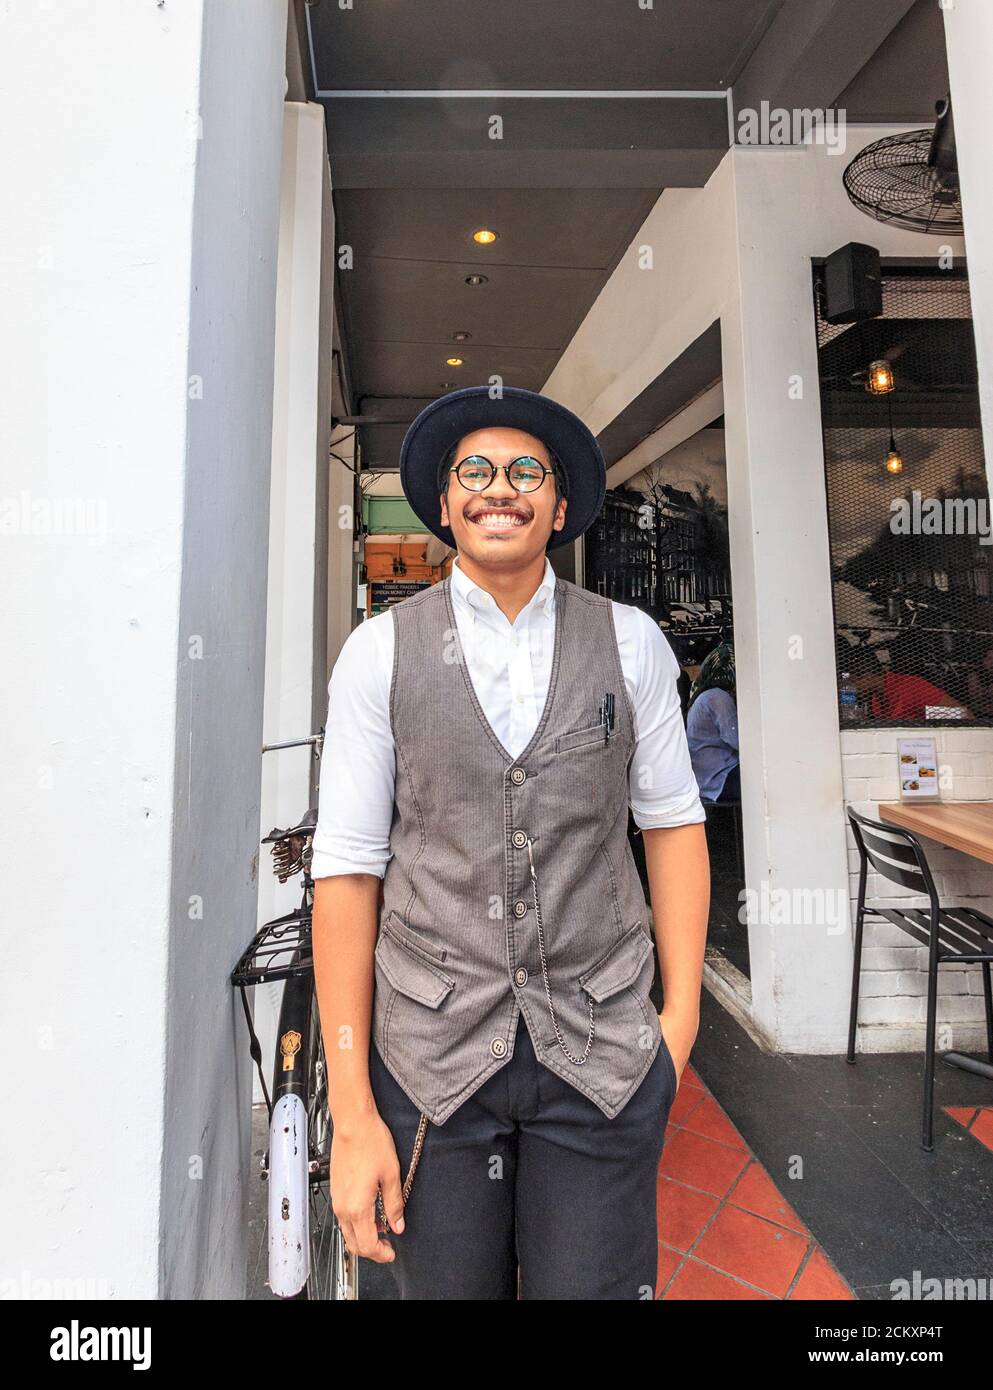 Local waiter, dressed in common clothing for modern Indians living in Singapore, who works in a cafe in Singapore's Little India district. Stock Photo